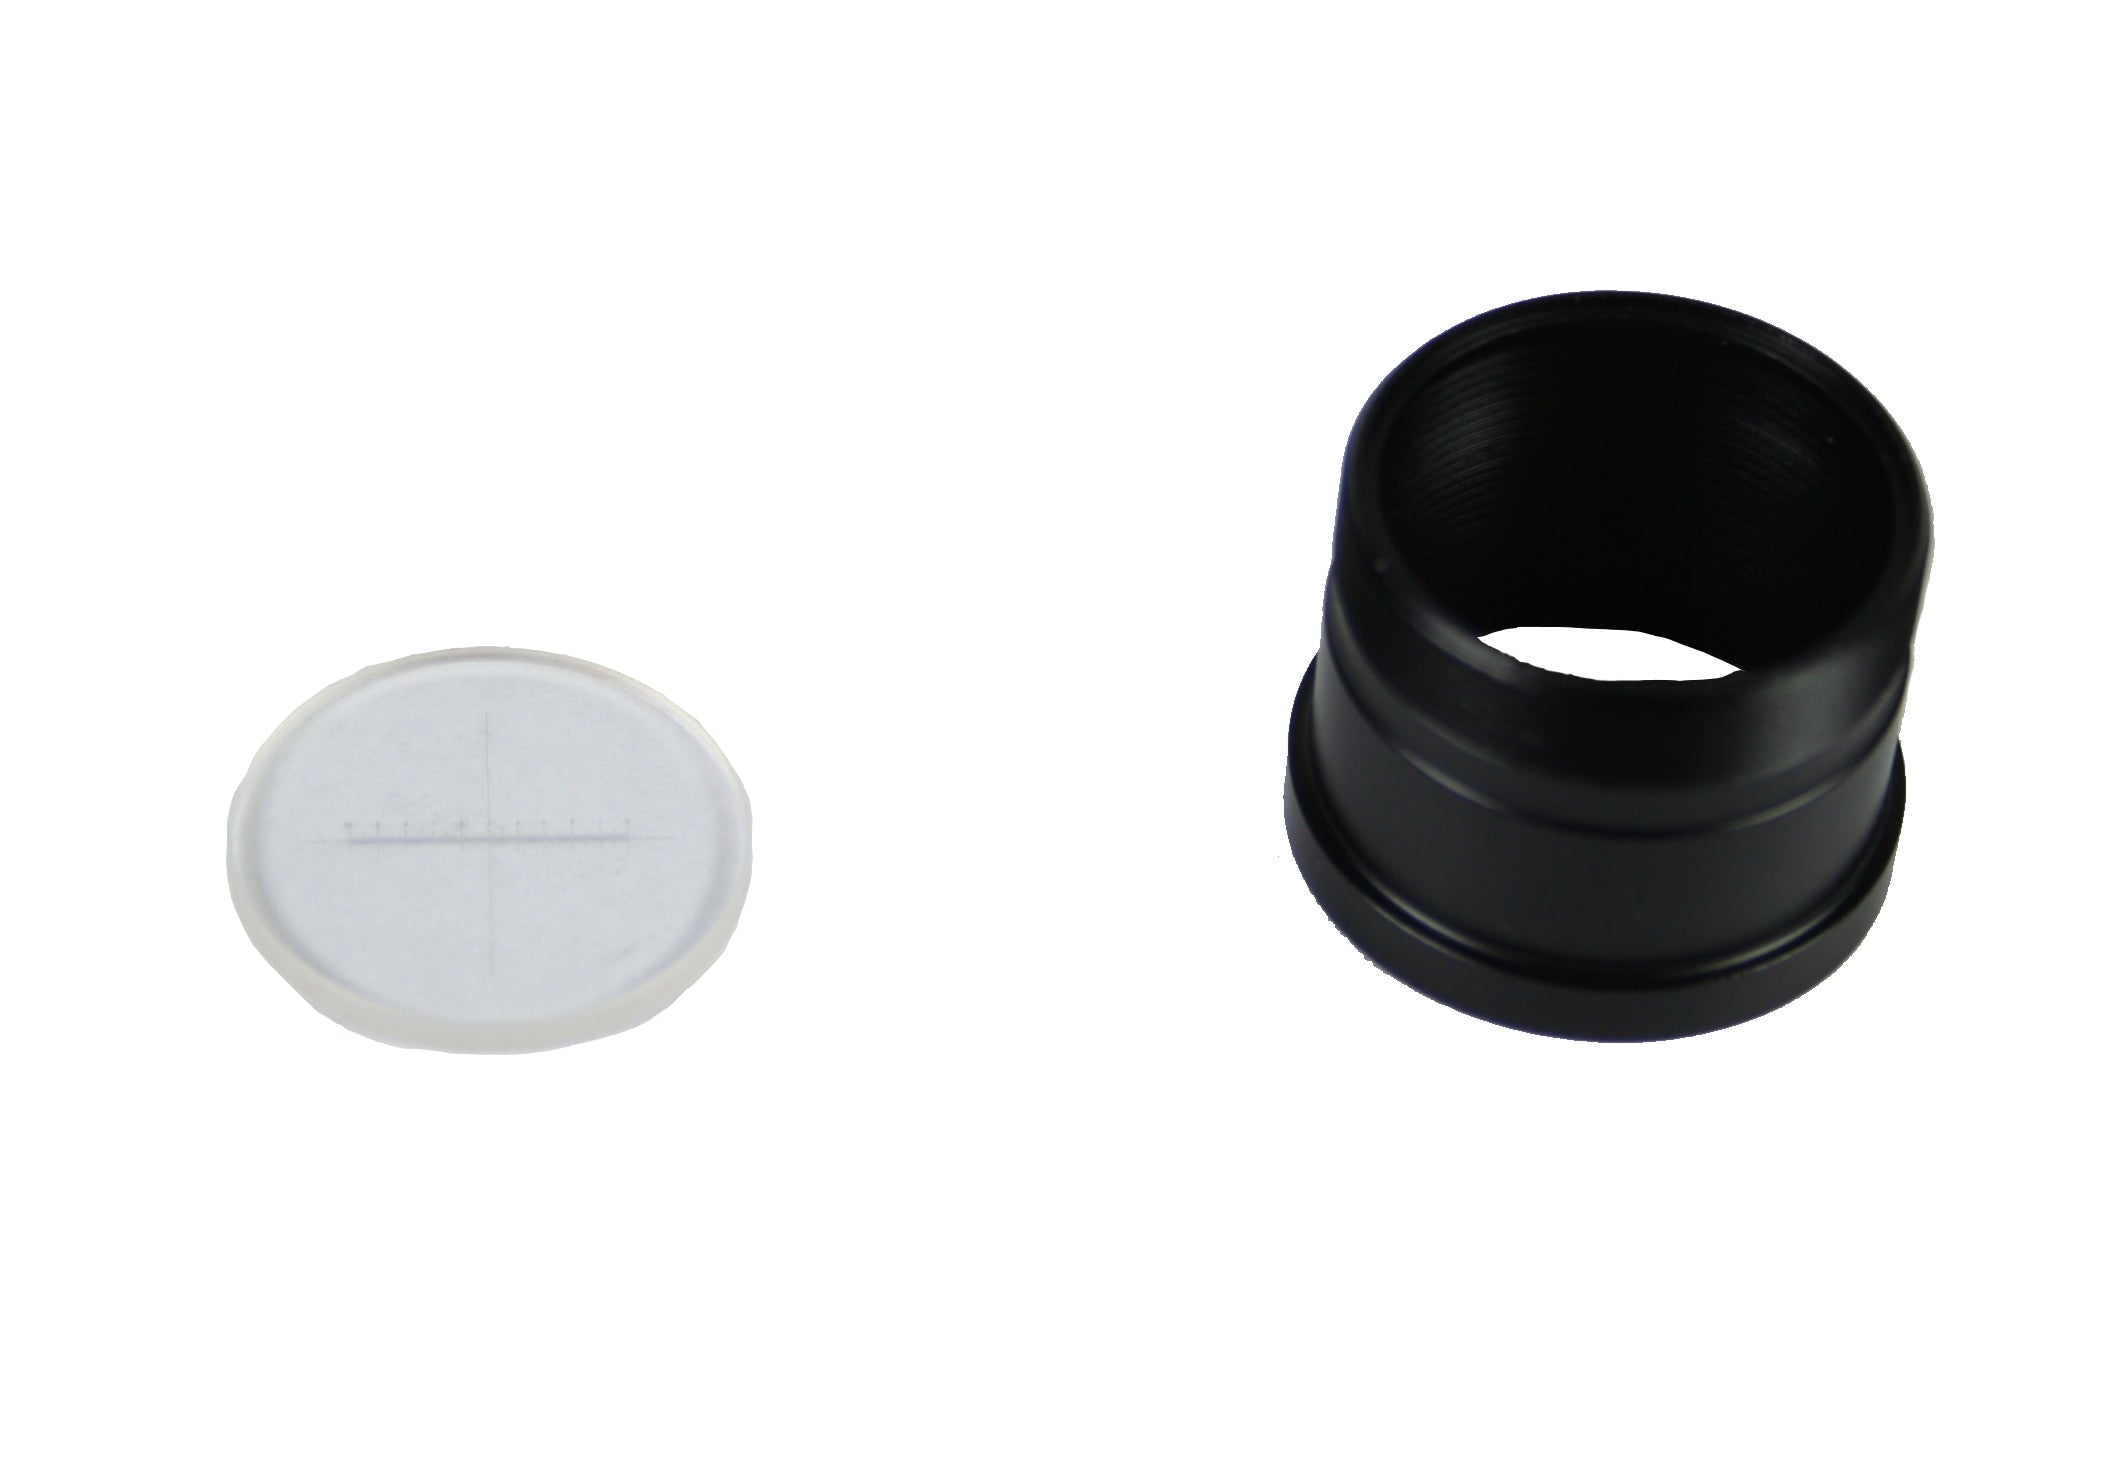 Reticle w/ 10mm/100 Divisions and Retainer Ring - MA6651